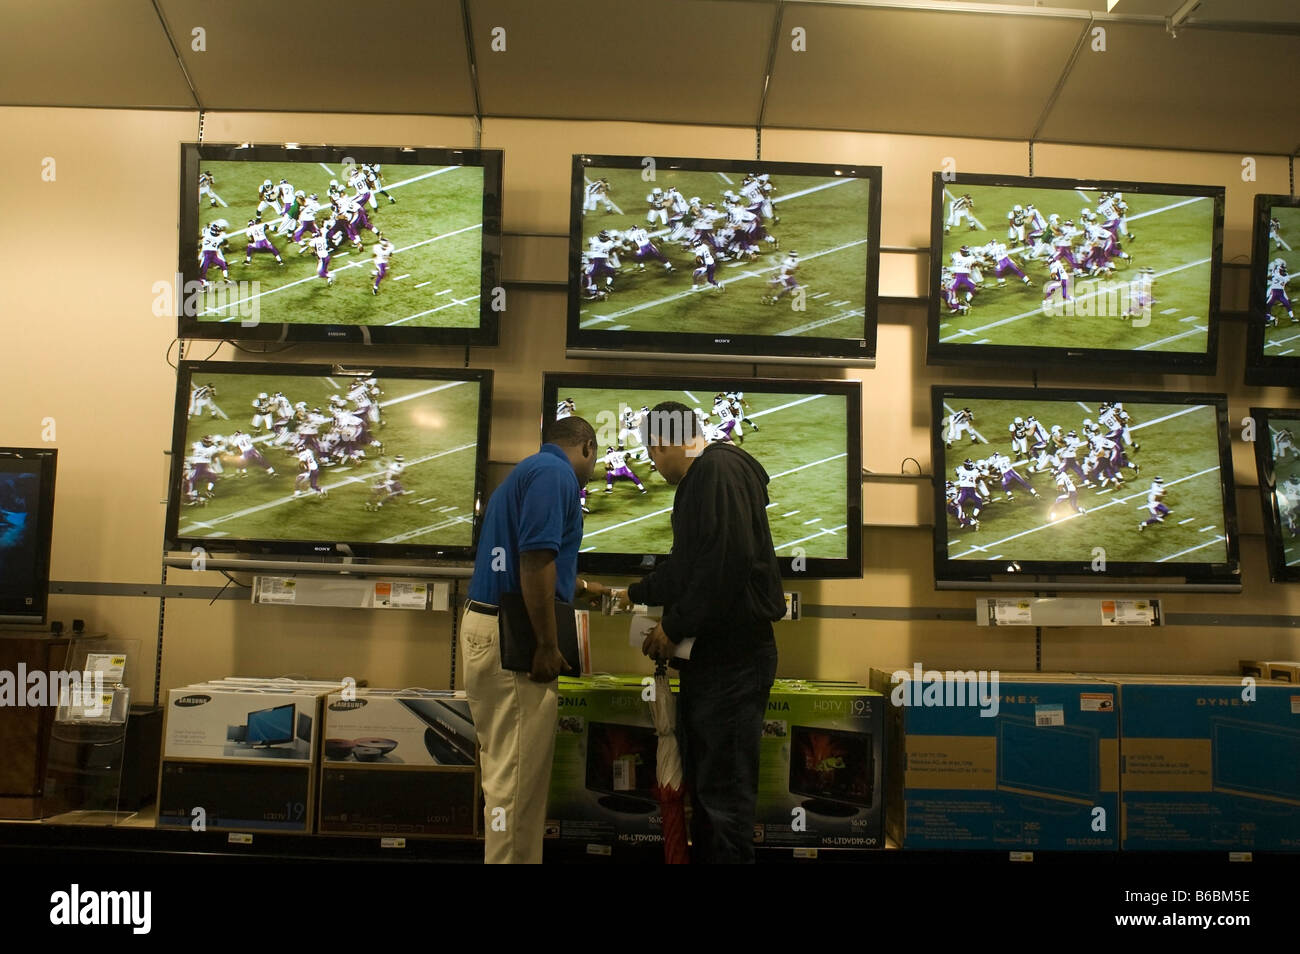 A sales associate assists a customer with flat screen televisions at the grand opening of a Best Buy electronic store Stock Photo